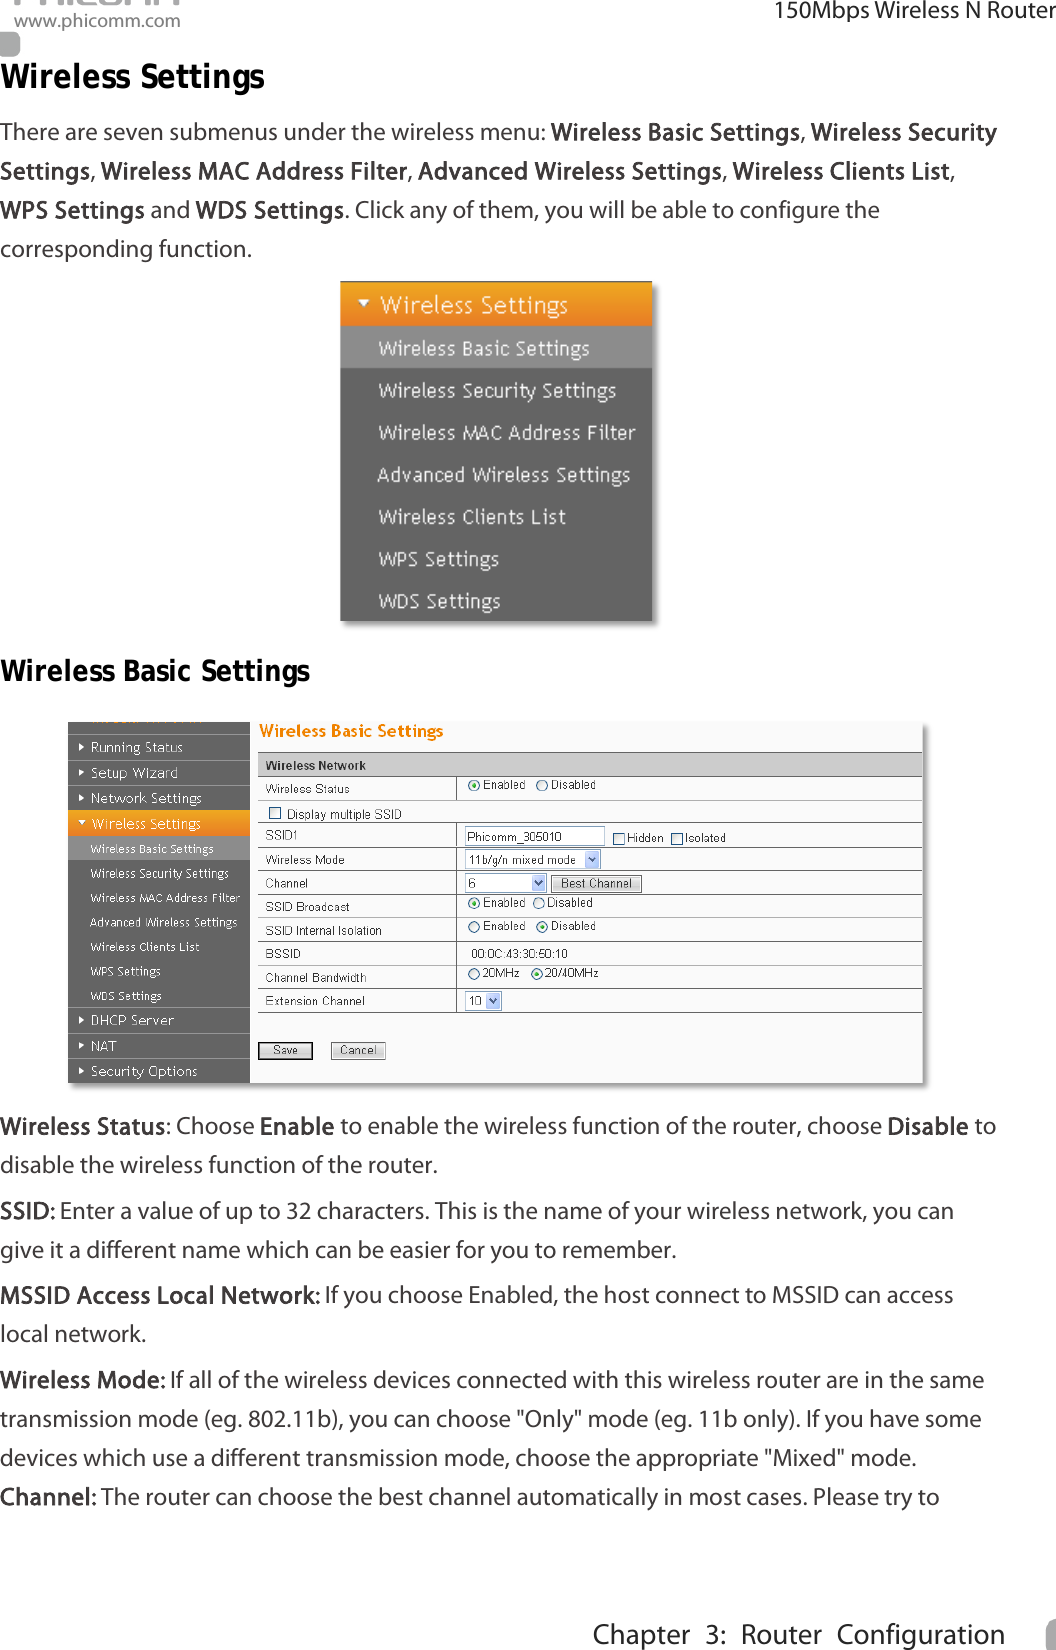                                                            150Mbps Wireless N Router www.phicomm.com 18 Chapter 3: Router Configuration  Wireless Settings There are seven submenus under the wireless menu: Wireless Basic Settings, Wireless Security Settings, Wireless MAC Address Filter, Advanced Wireless Settings, Wireless Clients List, WPS Settings and WDS Settings. Click any of them, you will be able to configure the corresponding function.    Wireless Basic Settings  Wireless Status: Choose Enable to enable the wireless function of the router, choose Disable to disable the wireless function of the router. SSID: Enter a value of up to 32 characters. This is the name of your wireless network, you can give it a different name which can be easier for you to remember. MSSID Access Local Network: If you choose Enabled, the host connect to MSSID can access local network. Wireless Mode: If all of the wireless devices connected with this wireless router are in the same transmission mode (eg. 802.11b), you can choose &quot;Only&quot; mode (eg. 11b only). If you have some devices which use a different transmission mode, choose the appropriate &quot;Mixed&quot; mode.   Channel: The router can choose the best channel automatically in most cases. Please try to 